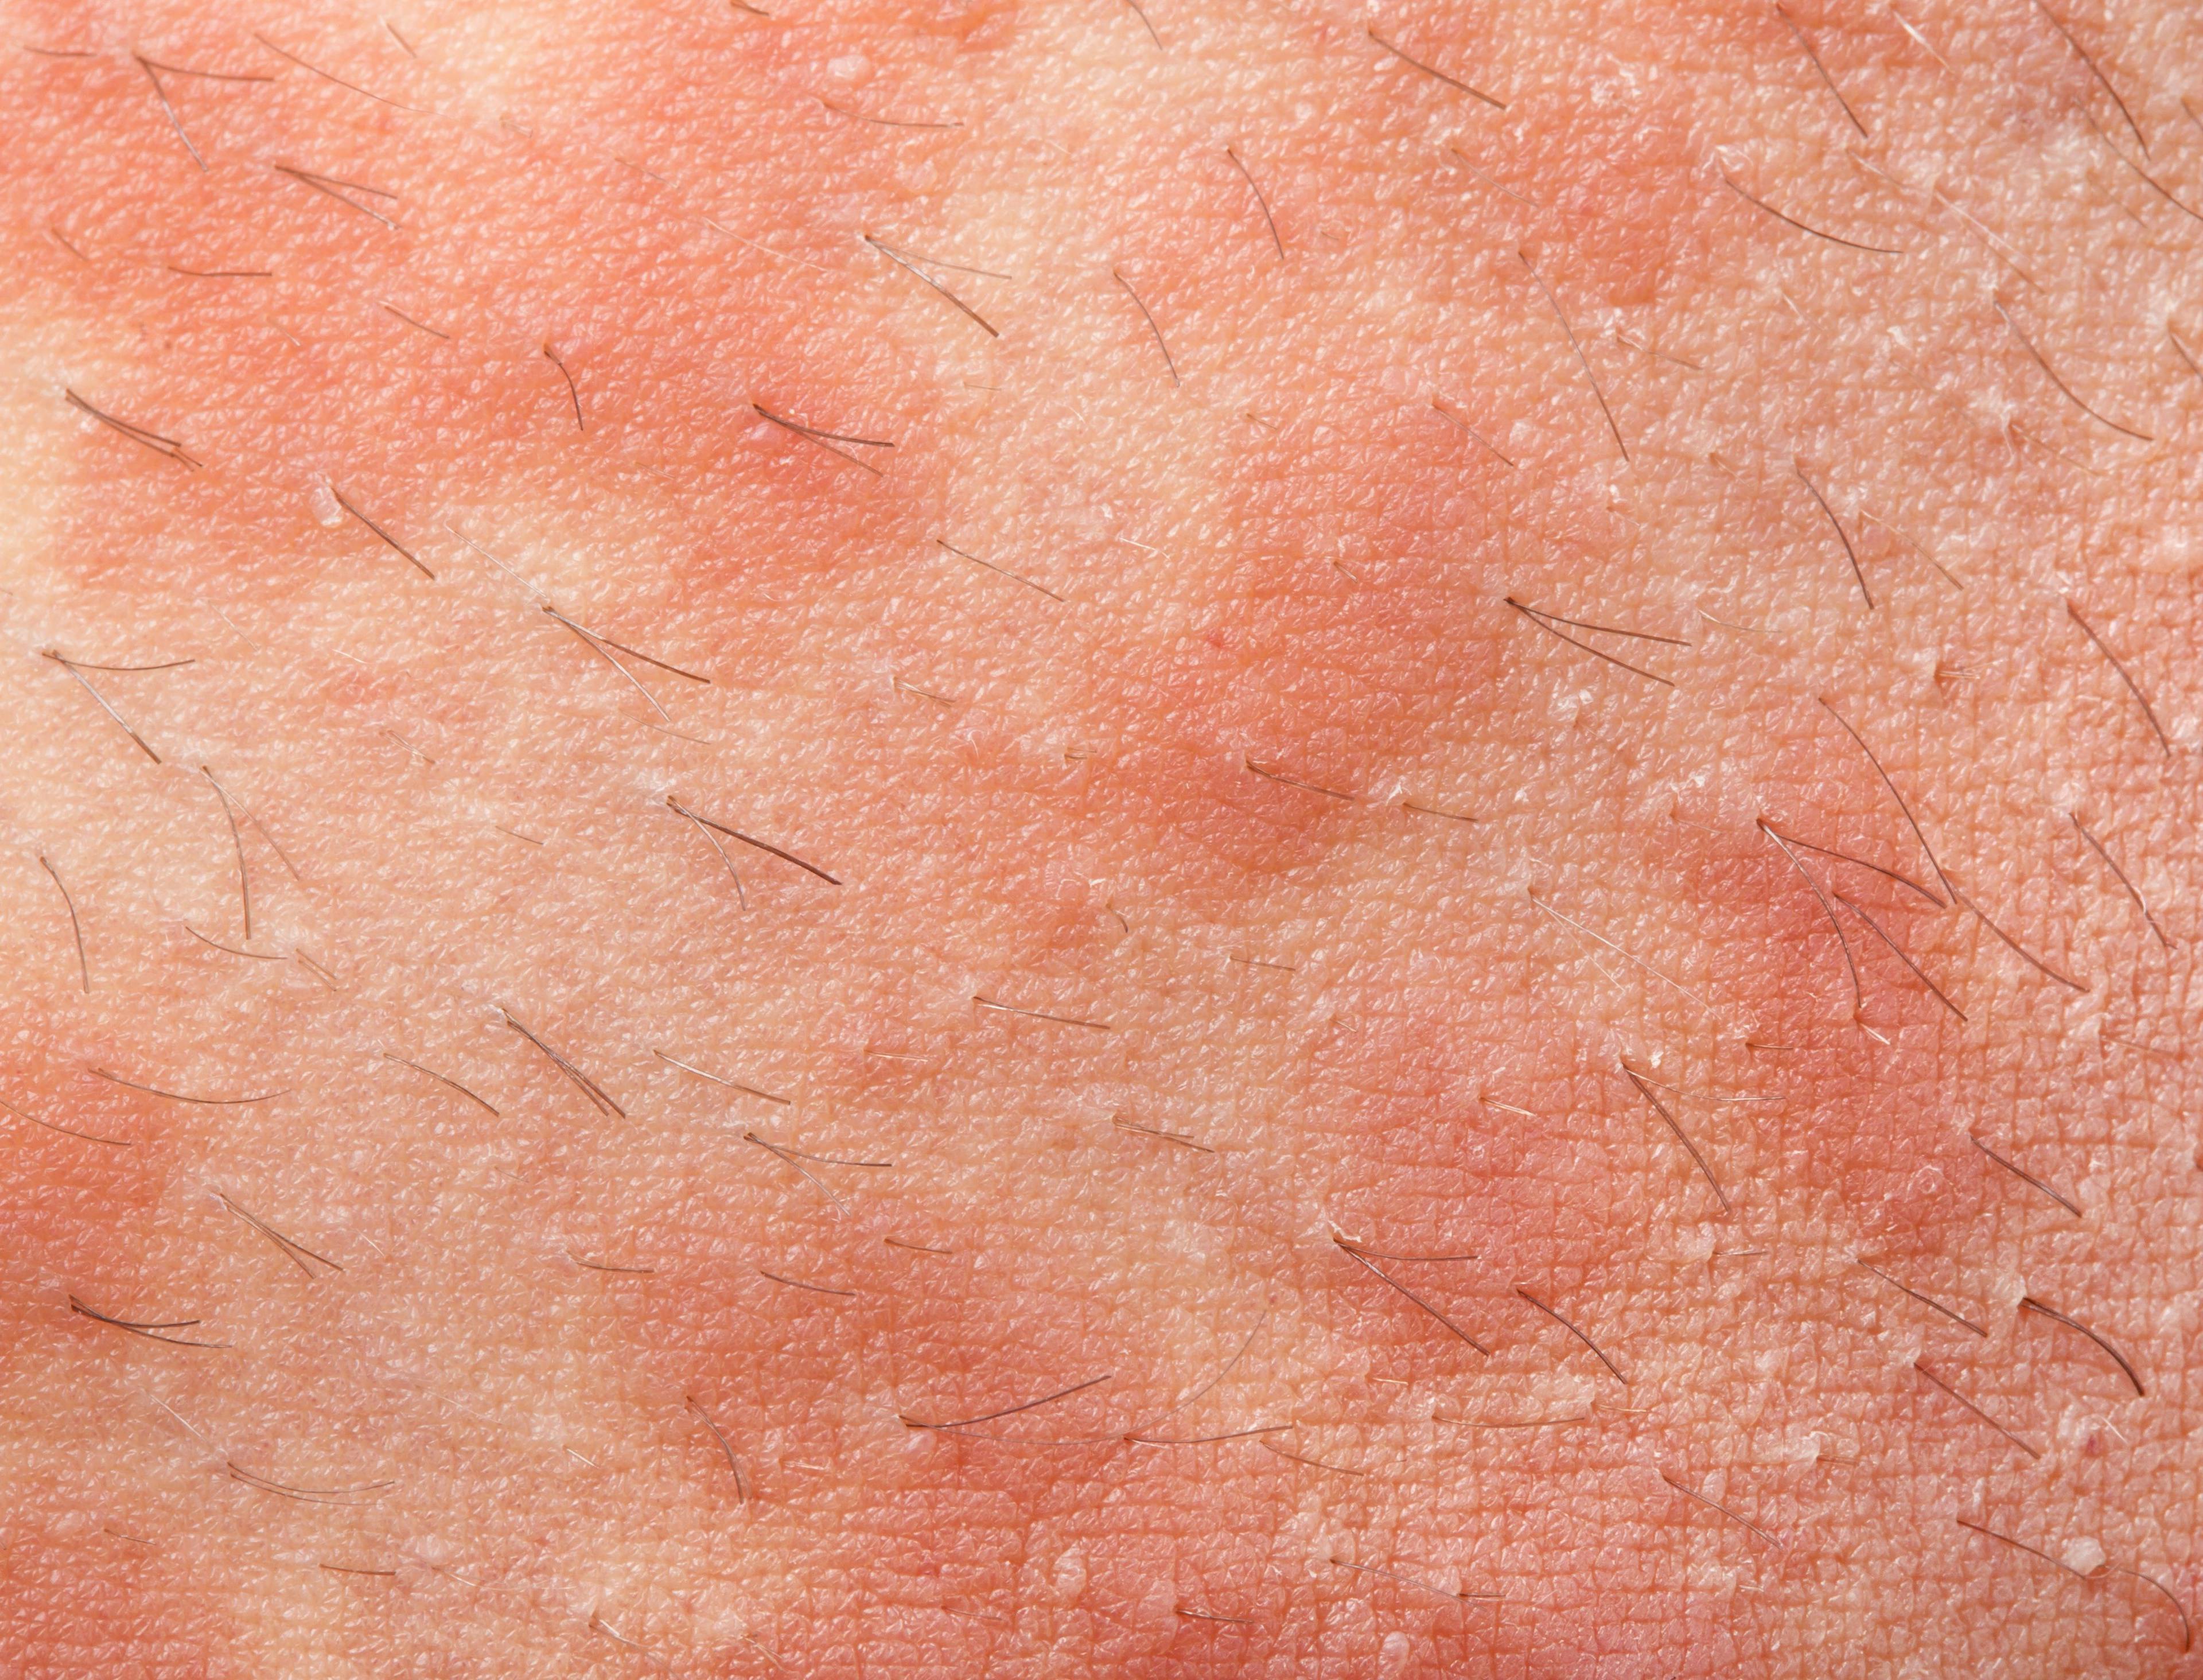 What's New on Dermatology Times: January 3-7